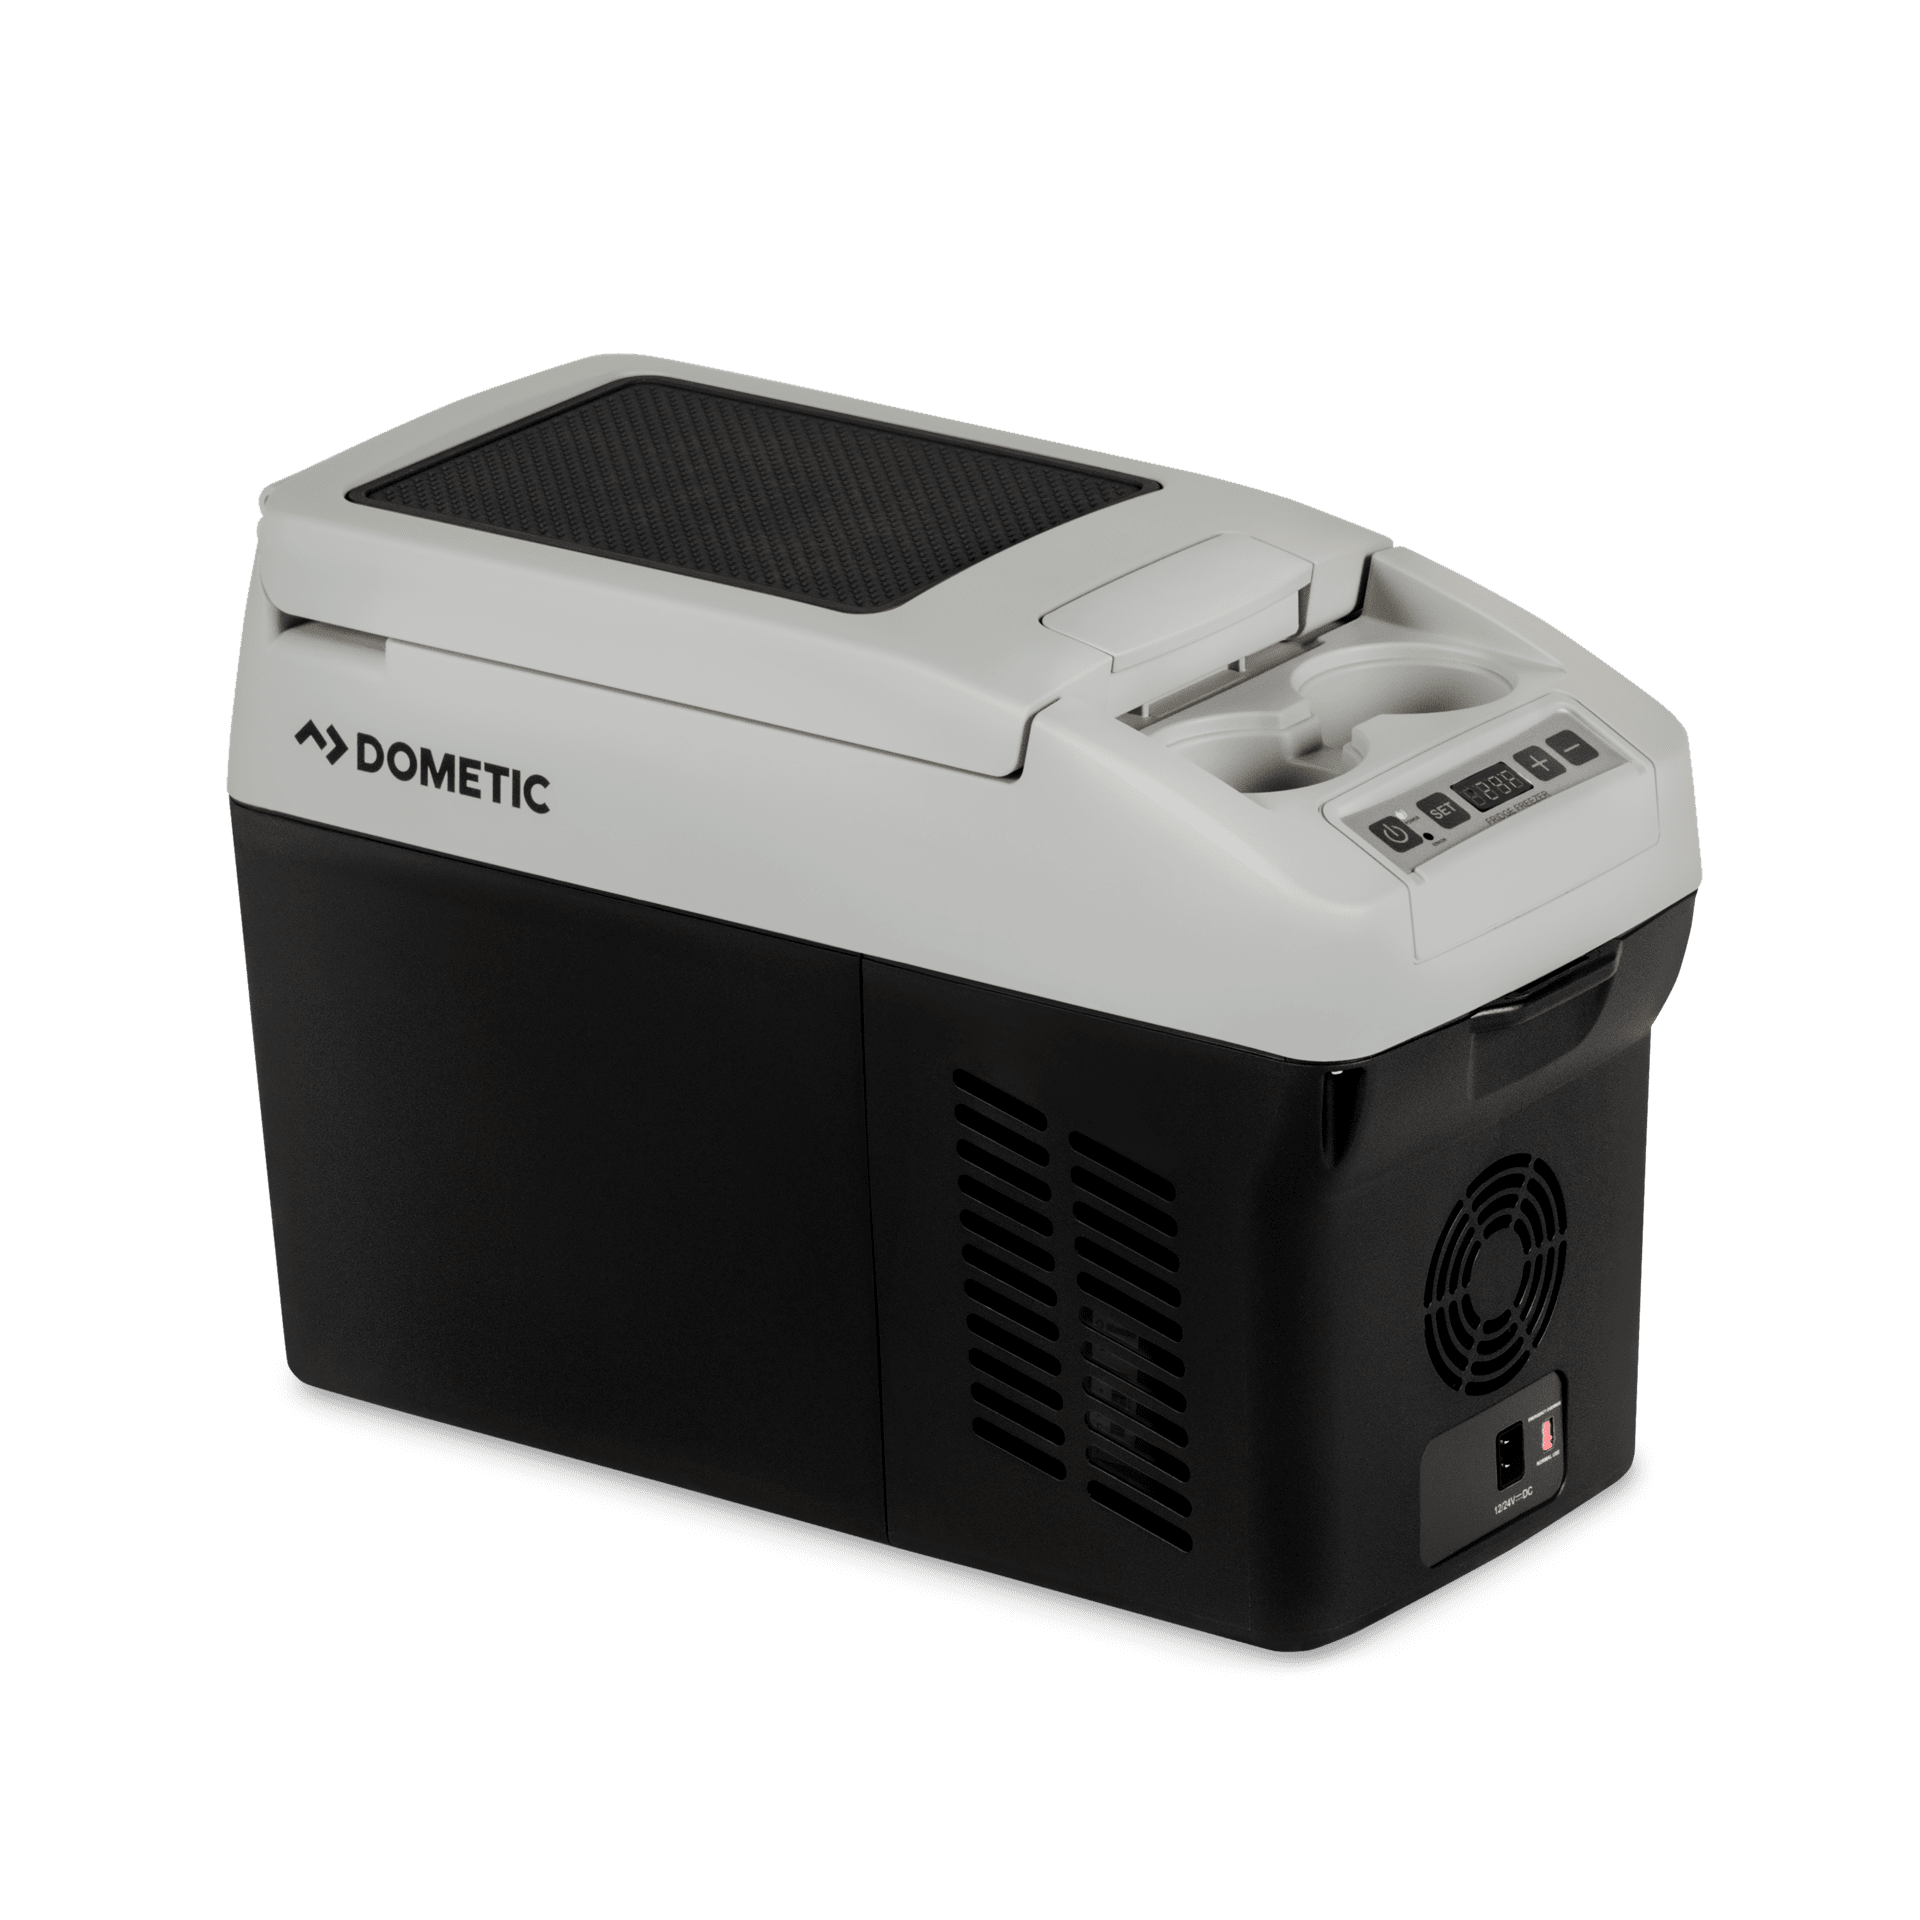 Dometic COOLFREEZE CDF 46 - Portable cooler